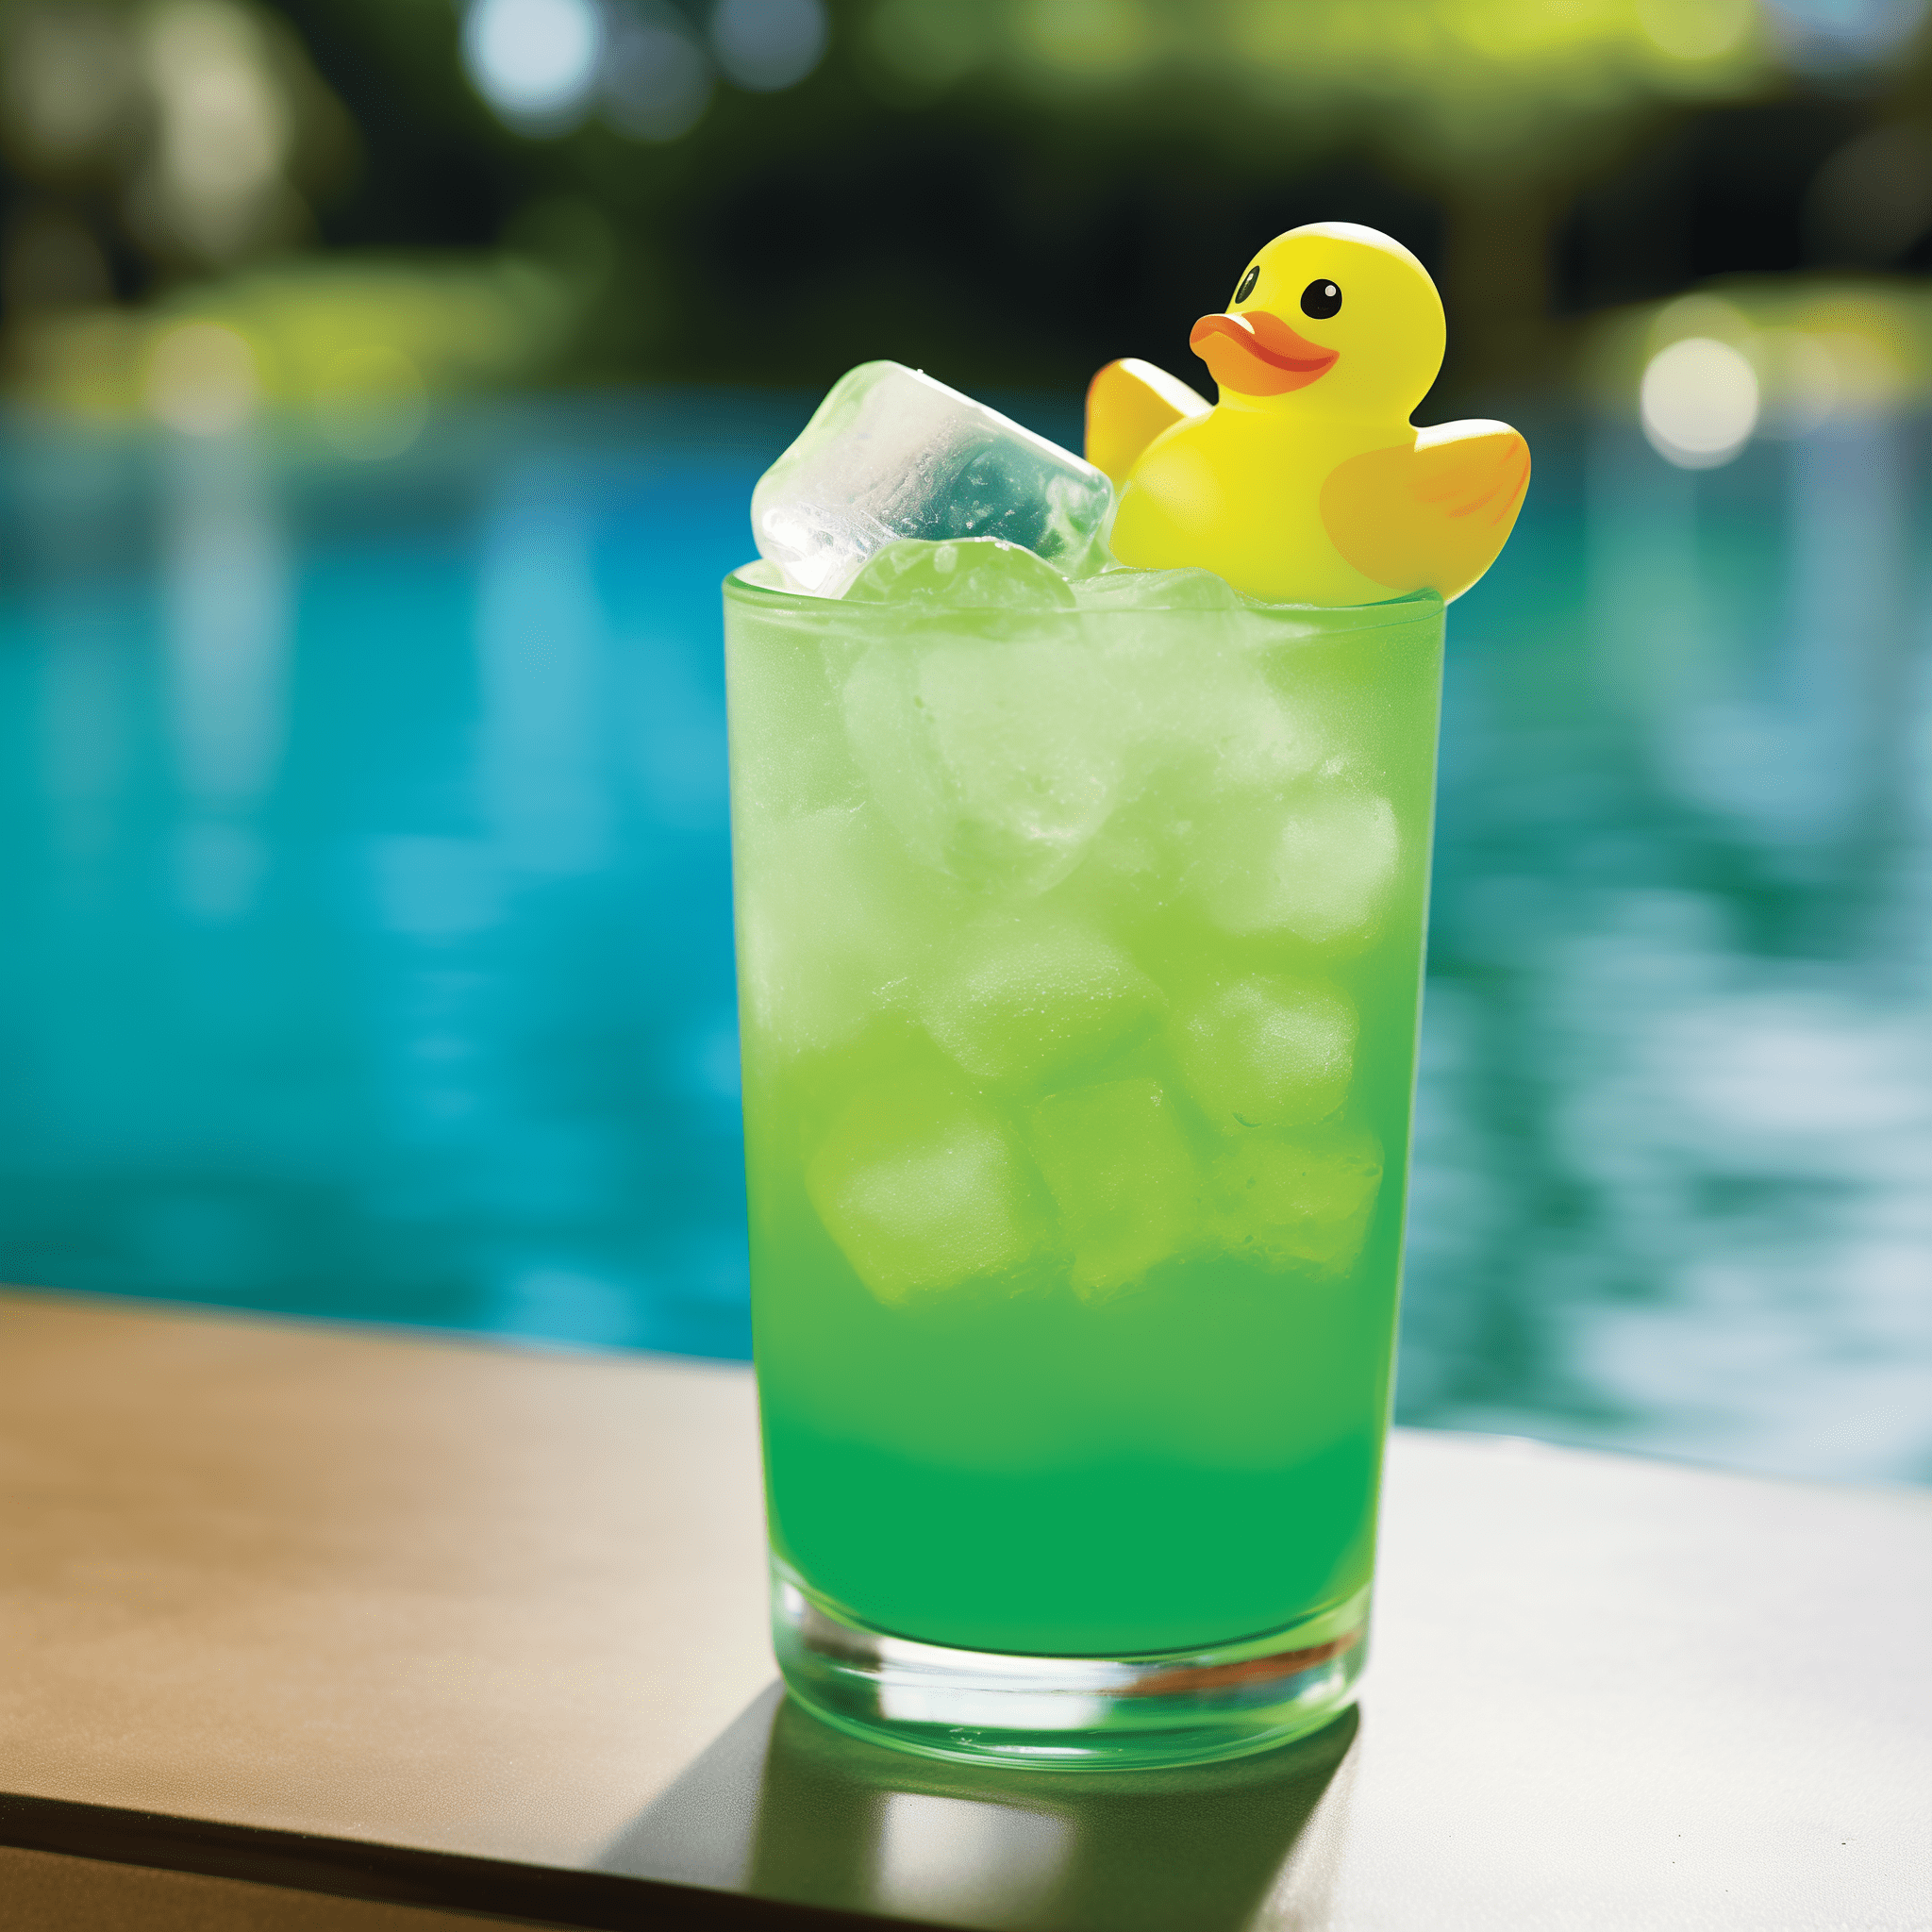 Rubber Ducky Cocktail Recipe - The Rubber Ducky cocktail is a sweet and fruity concoction with a tropical twist. The Midori provides a melon-like sweetness, while the peach schnapps adds a soft, peachy flavor. The cranberry juice offers a slight tartness that balances the sweetness, making it a refreshing and delightful drink.